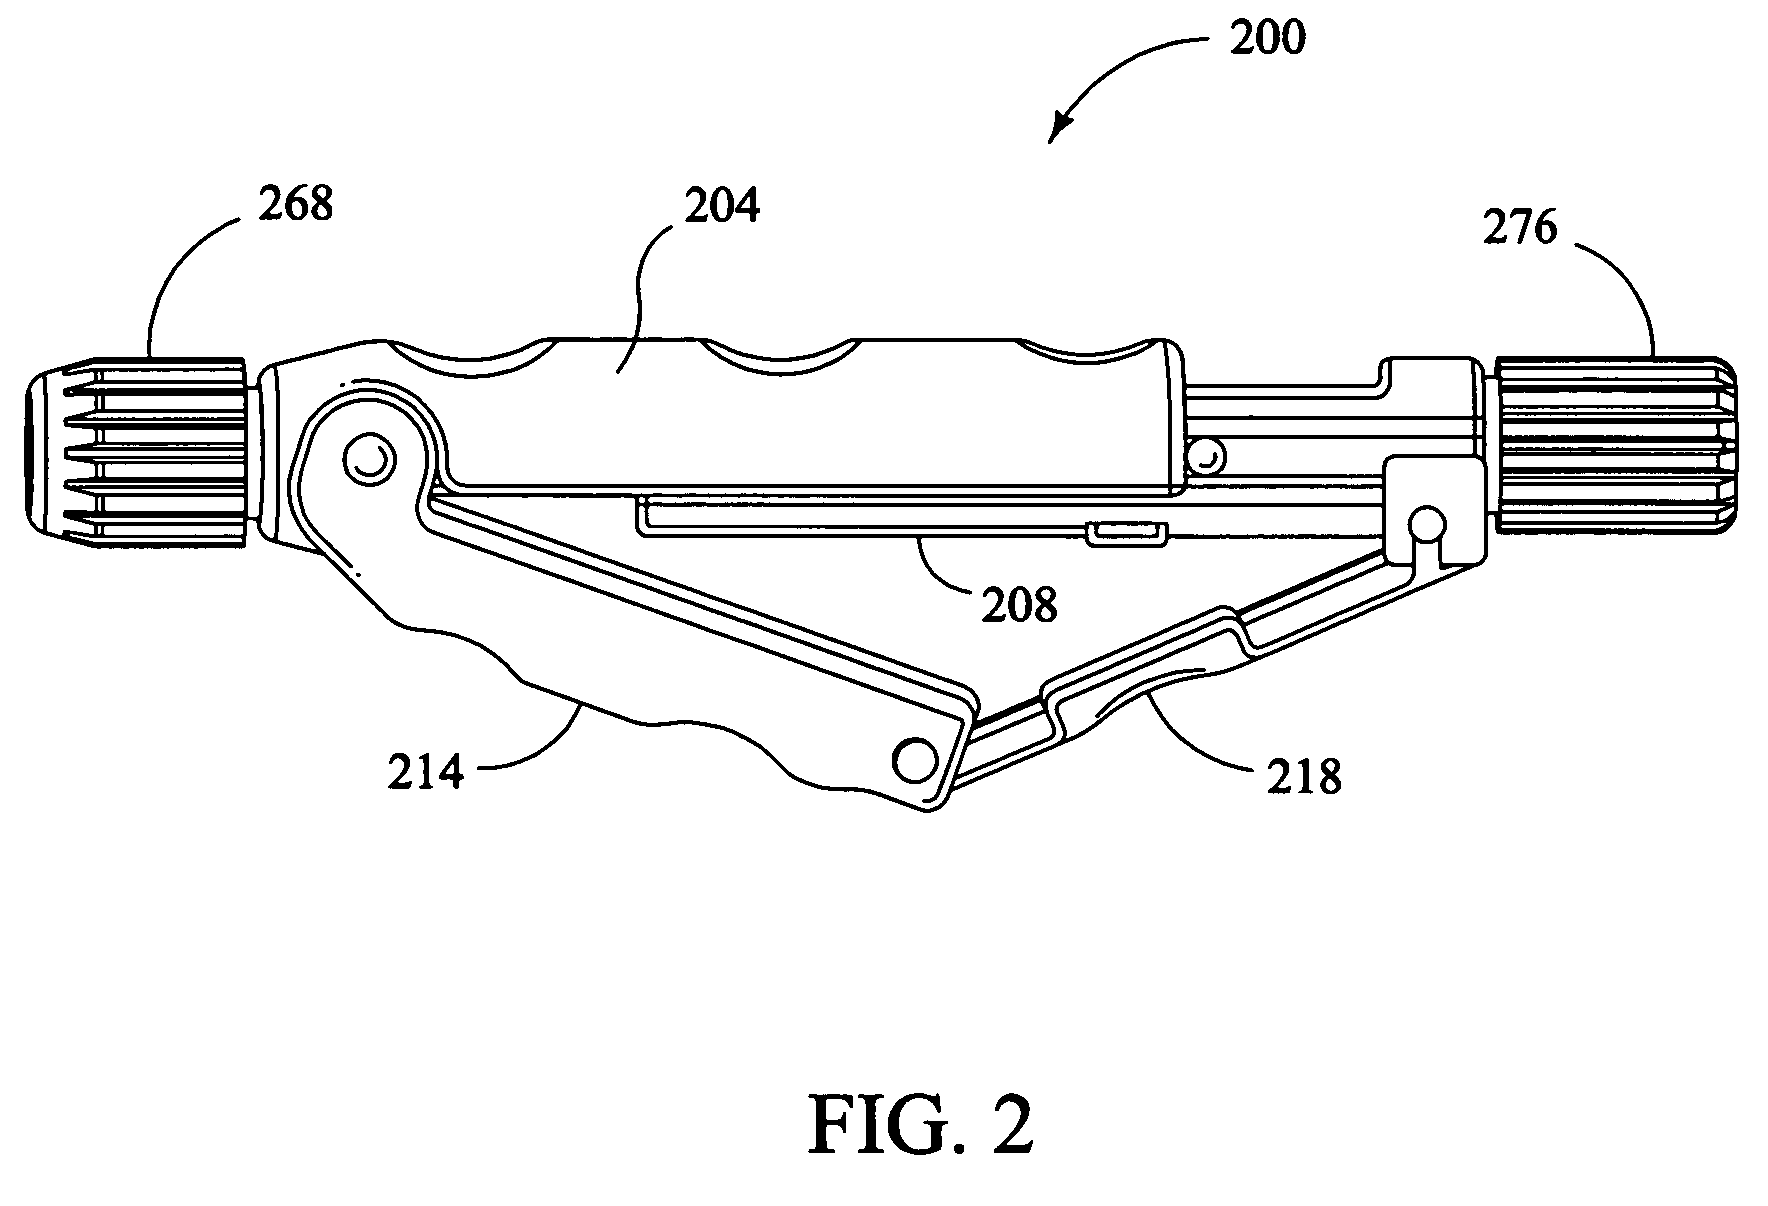 Handle and articulator system and method